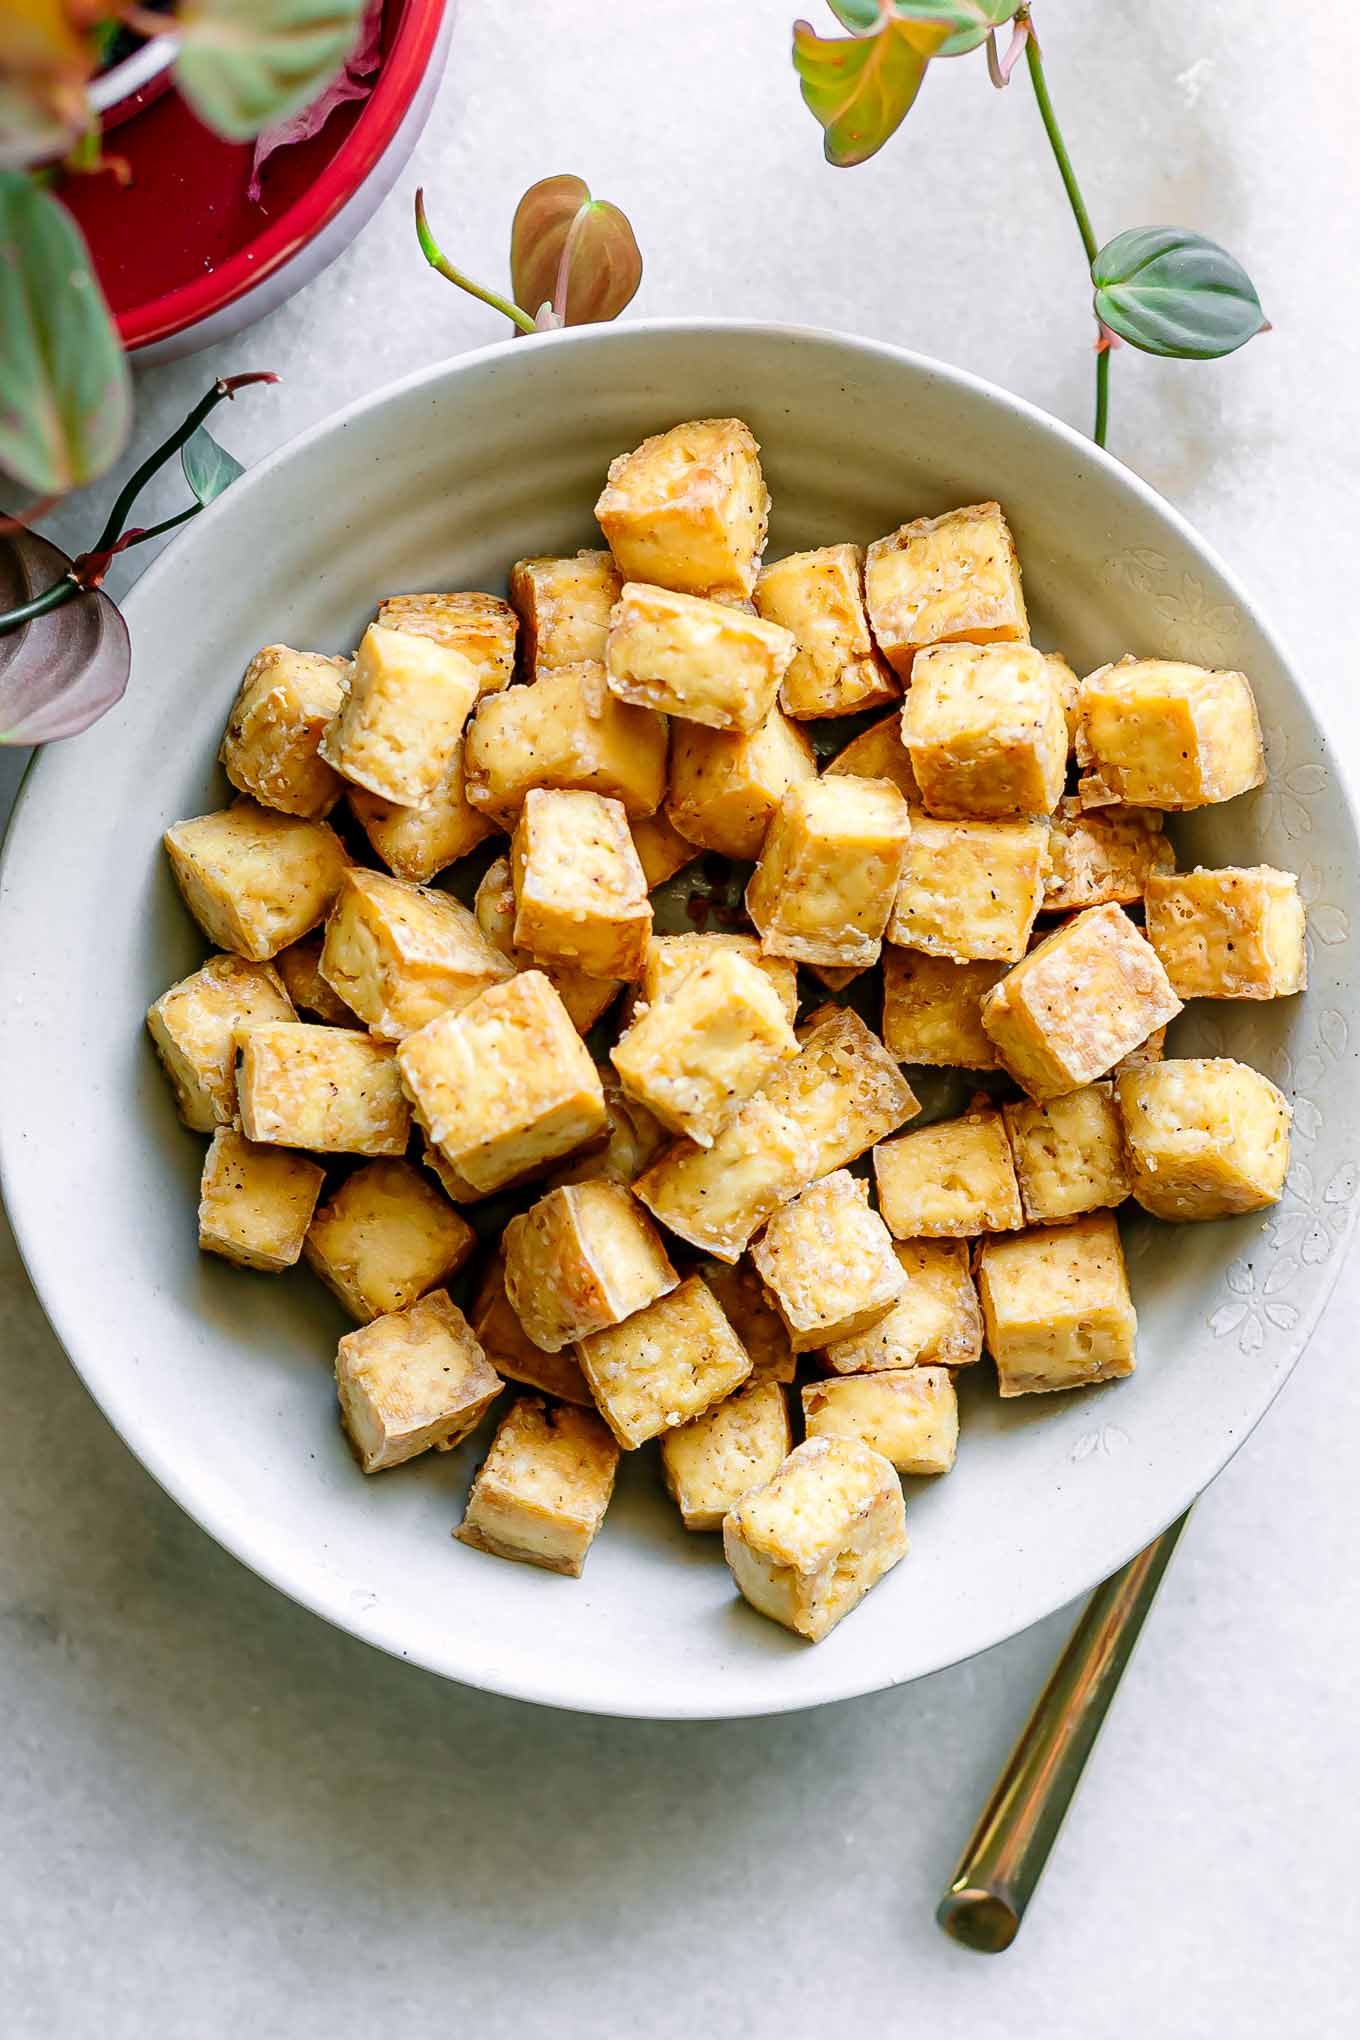 How to Make Crispy Tofu in the Oven